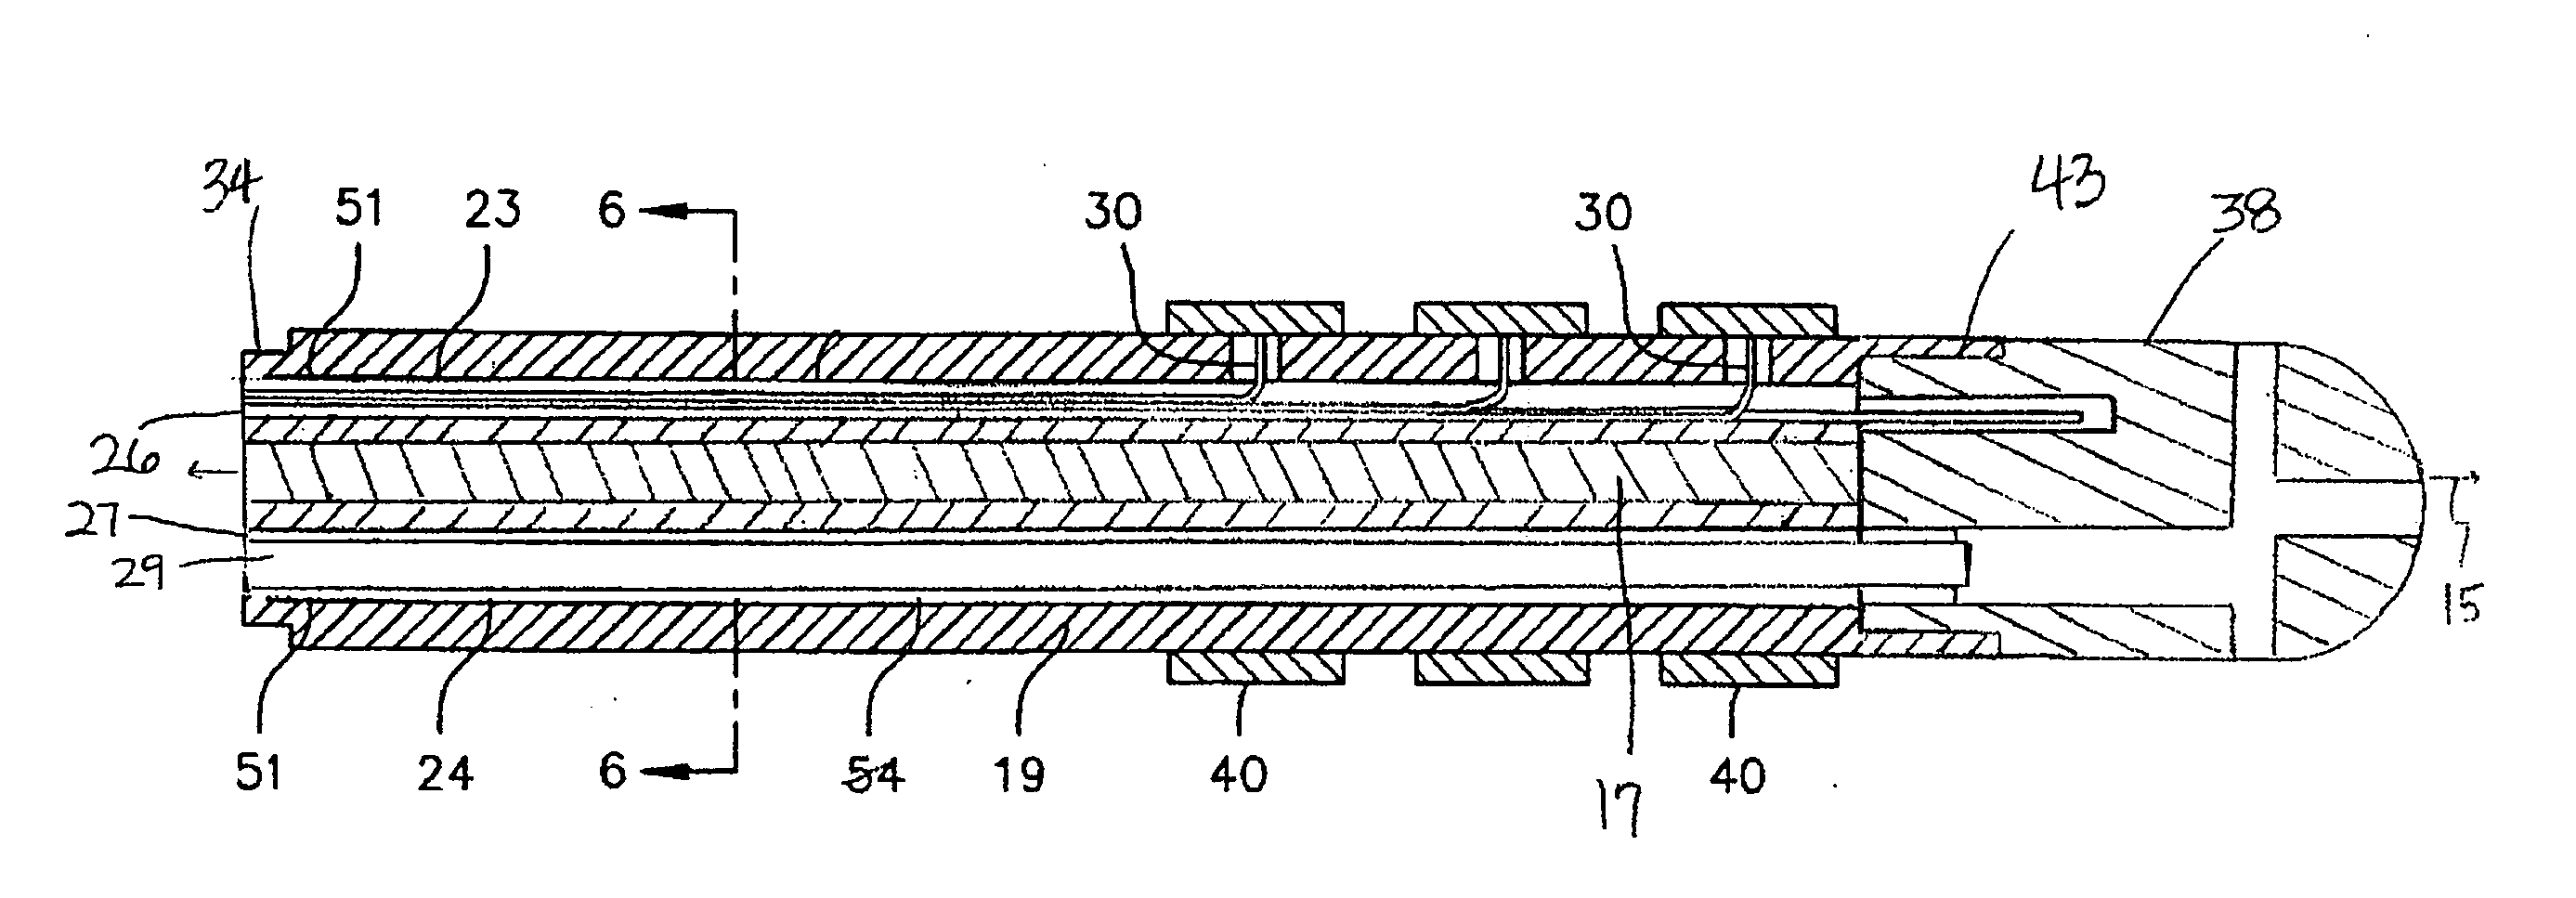 Steerable catheter with in-plane deflection